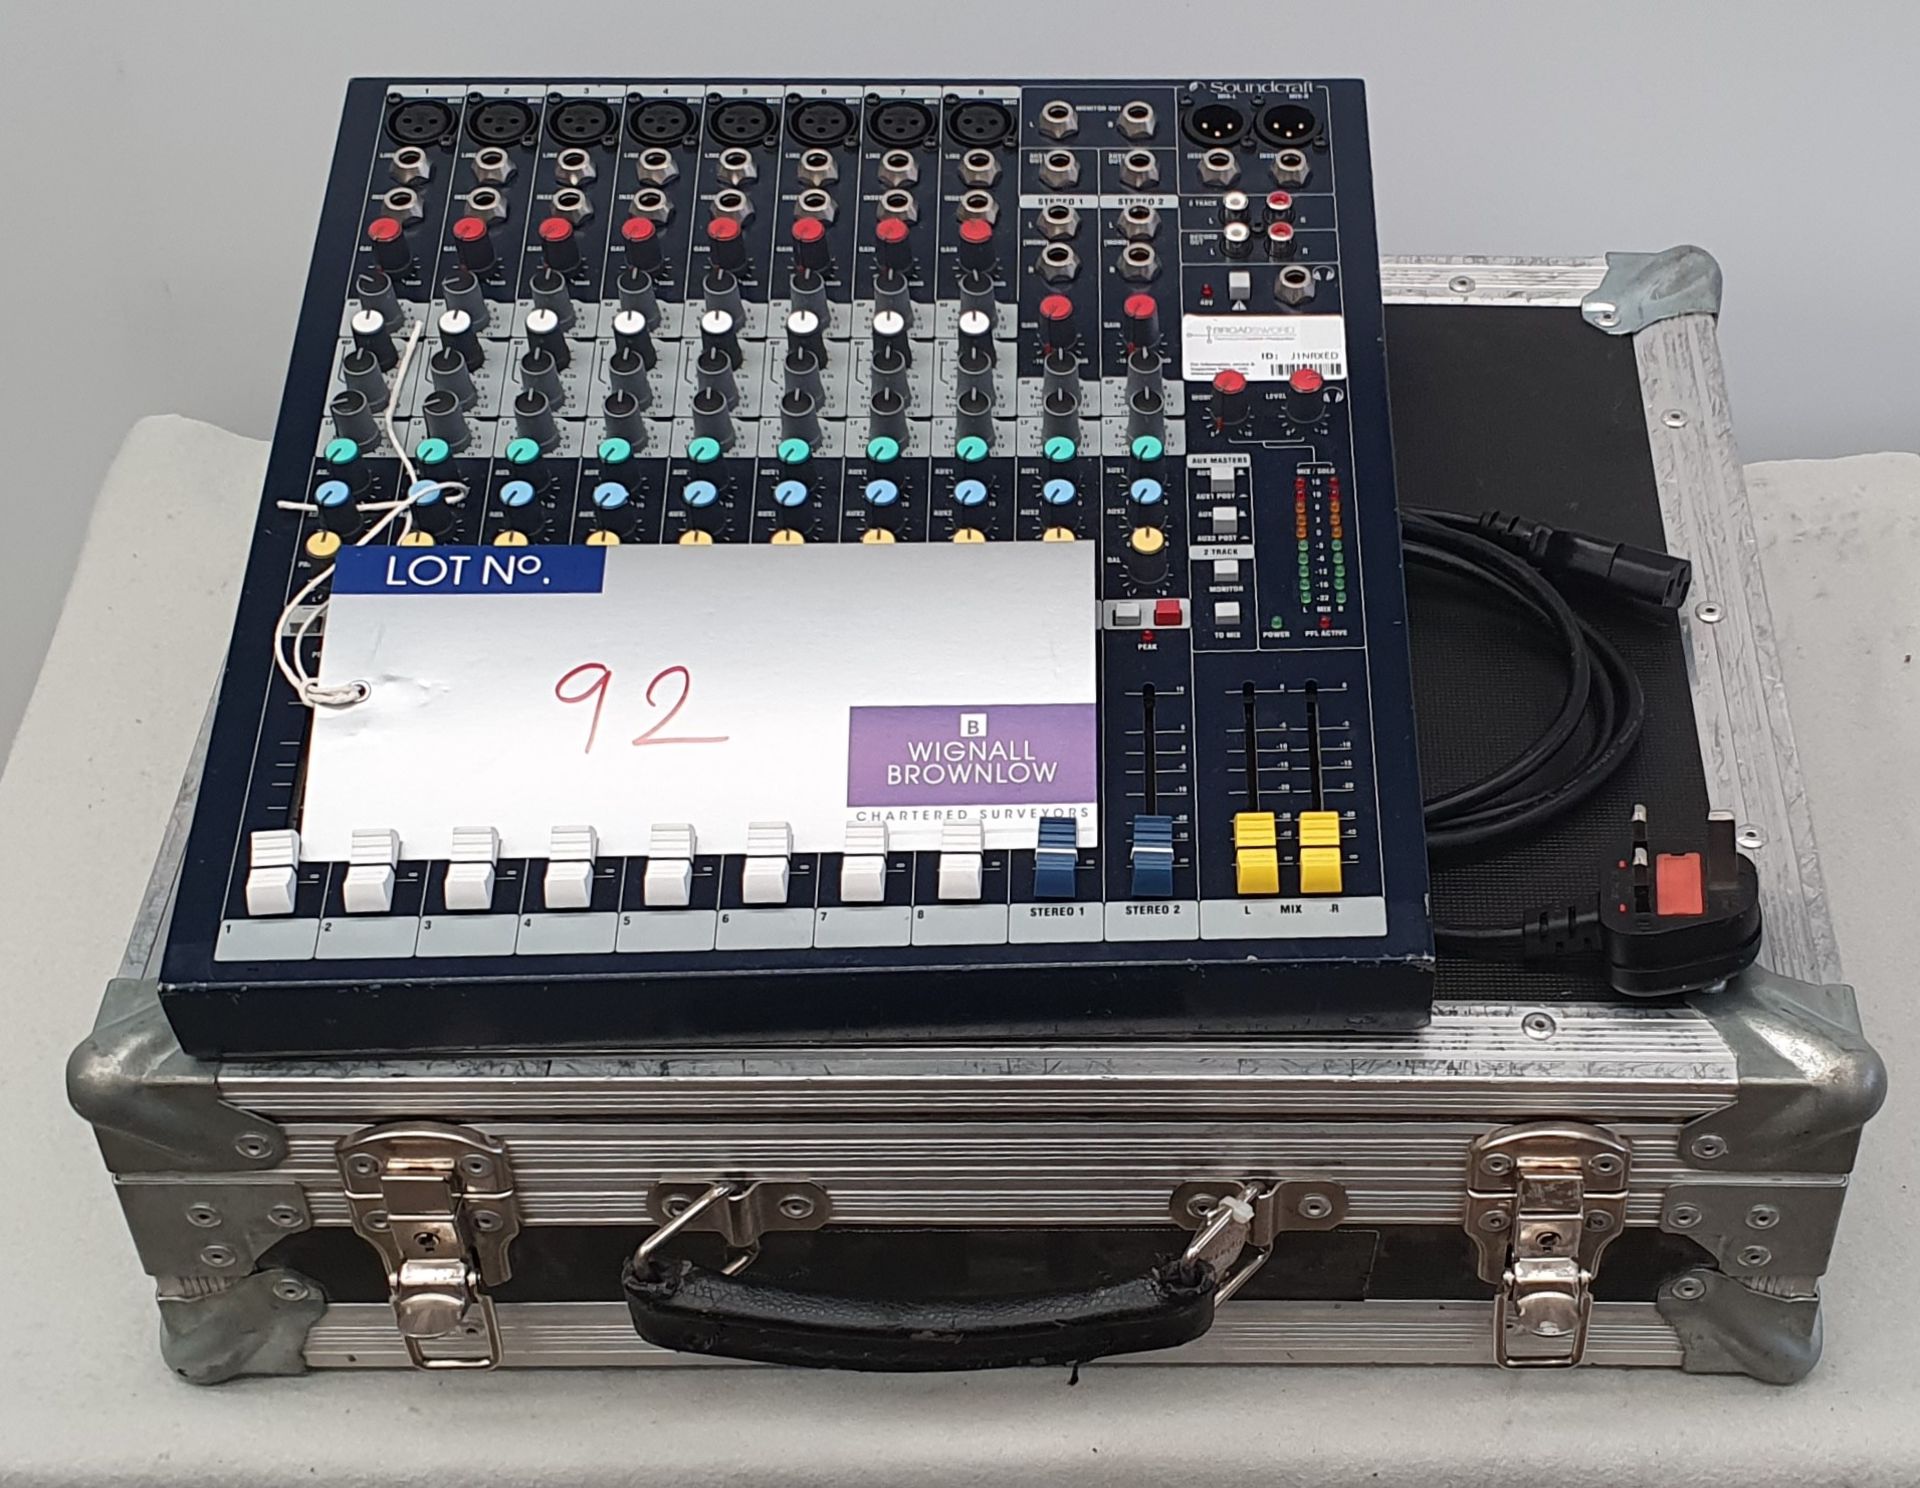 A Soundcraft EPM8 8 Channel Mixer Sound Mixing Desk with Road Ready Flight Case, 475mm x 390mm x